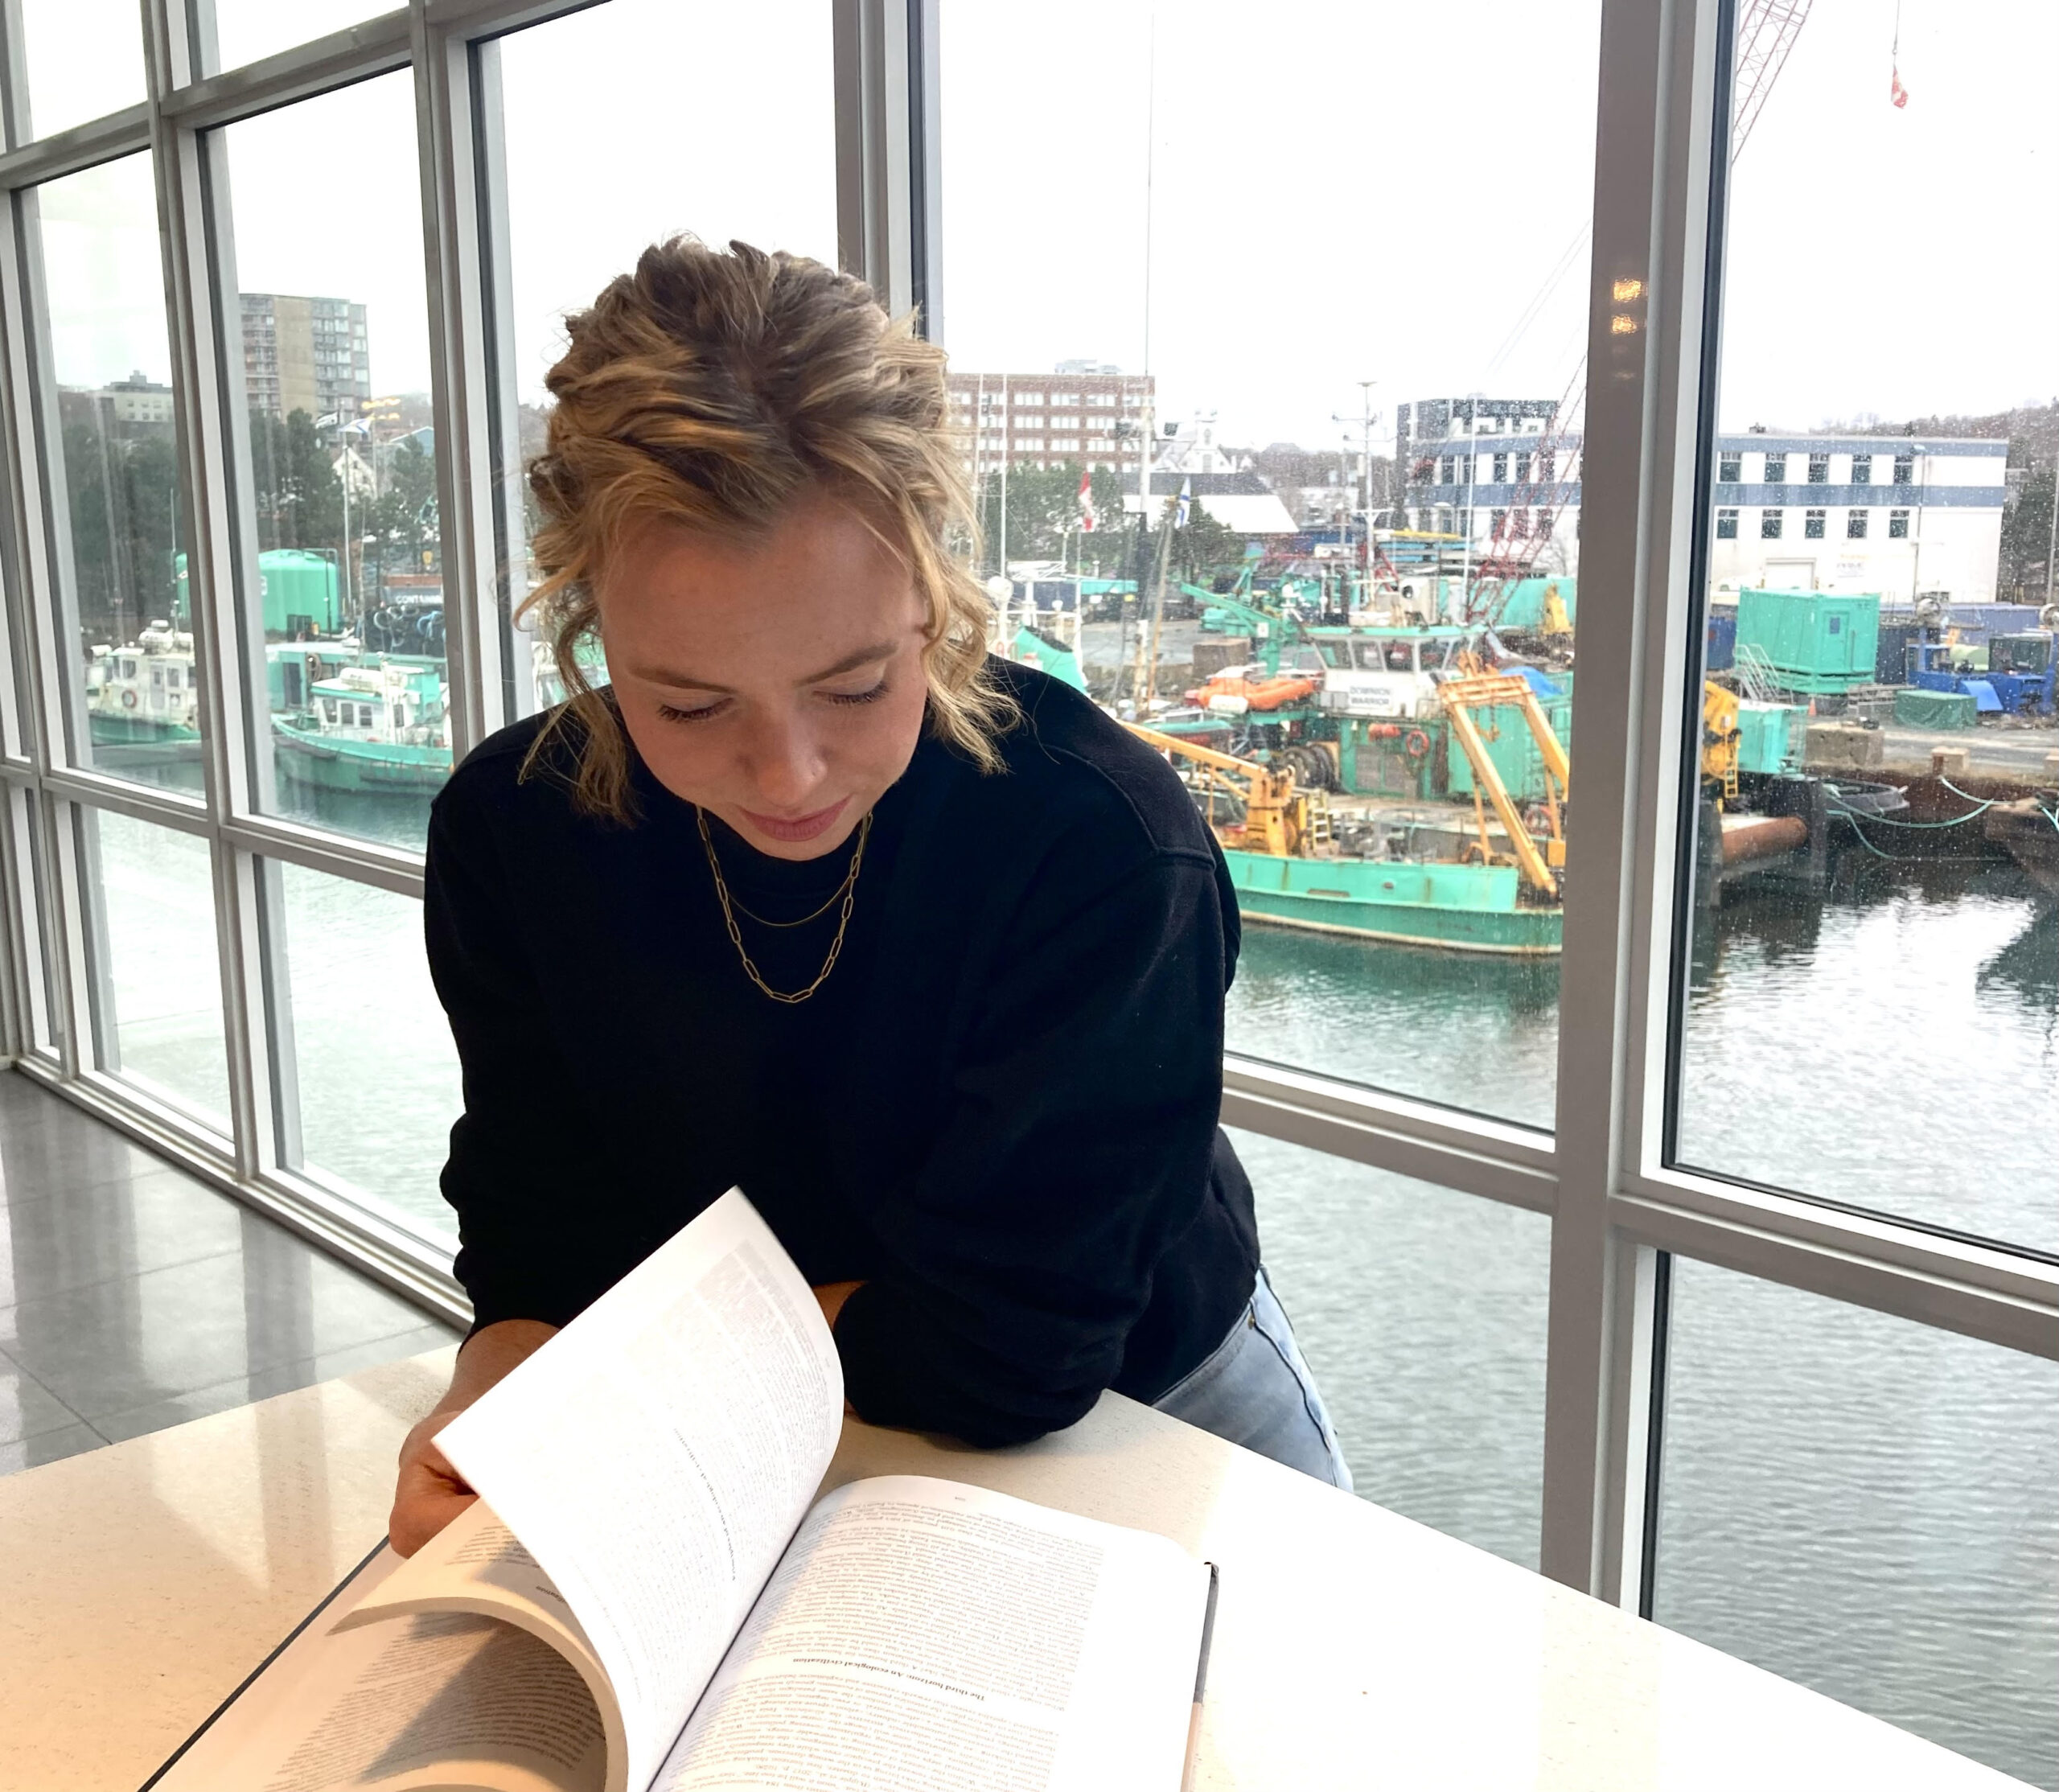 Woman with blonde hair reads textbook in room on the ocean with boats in the background